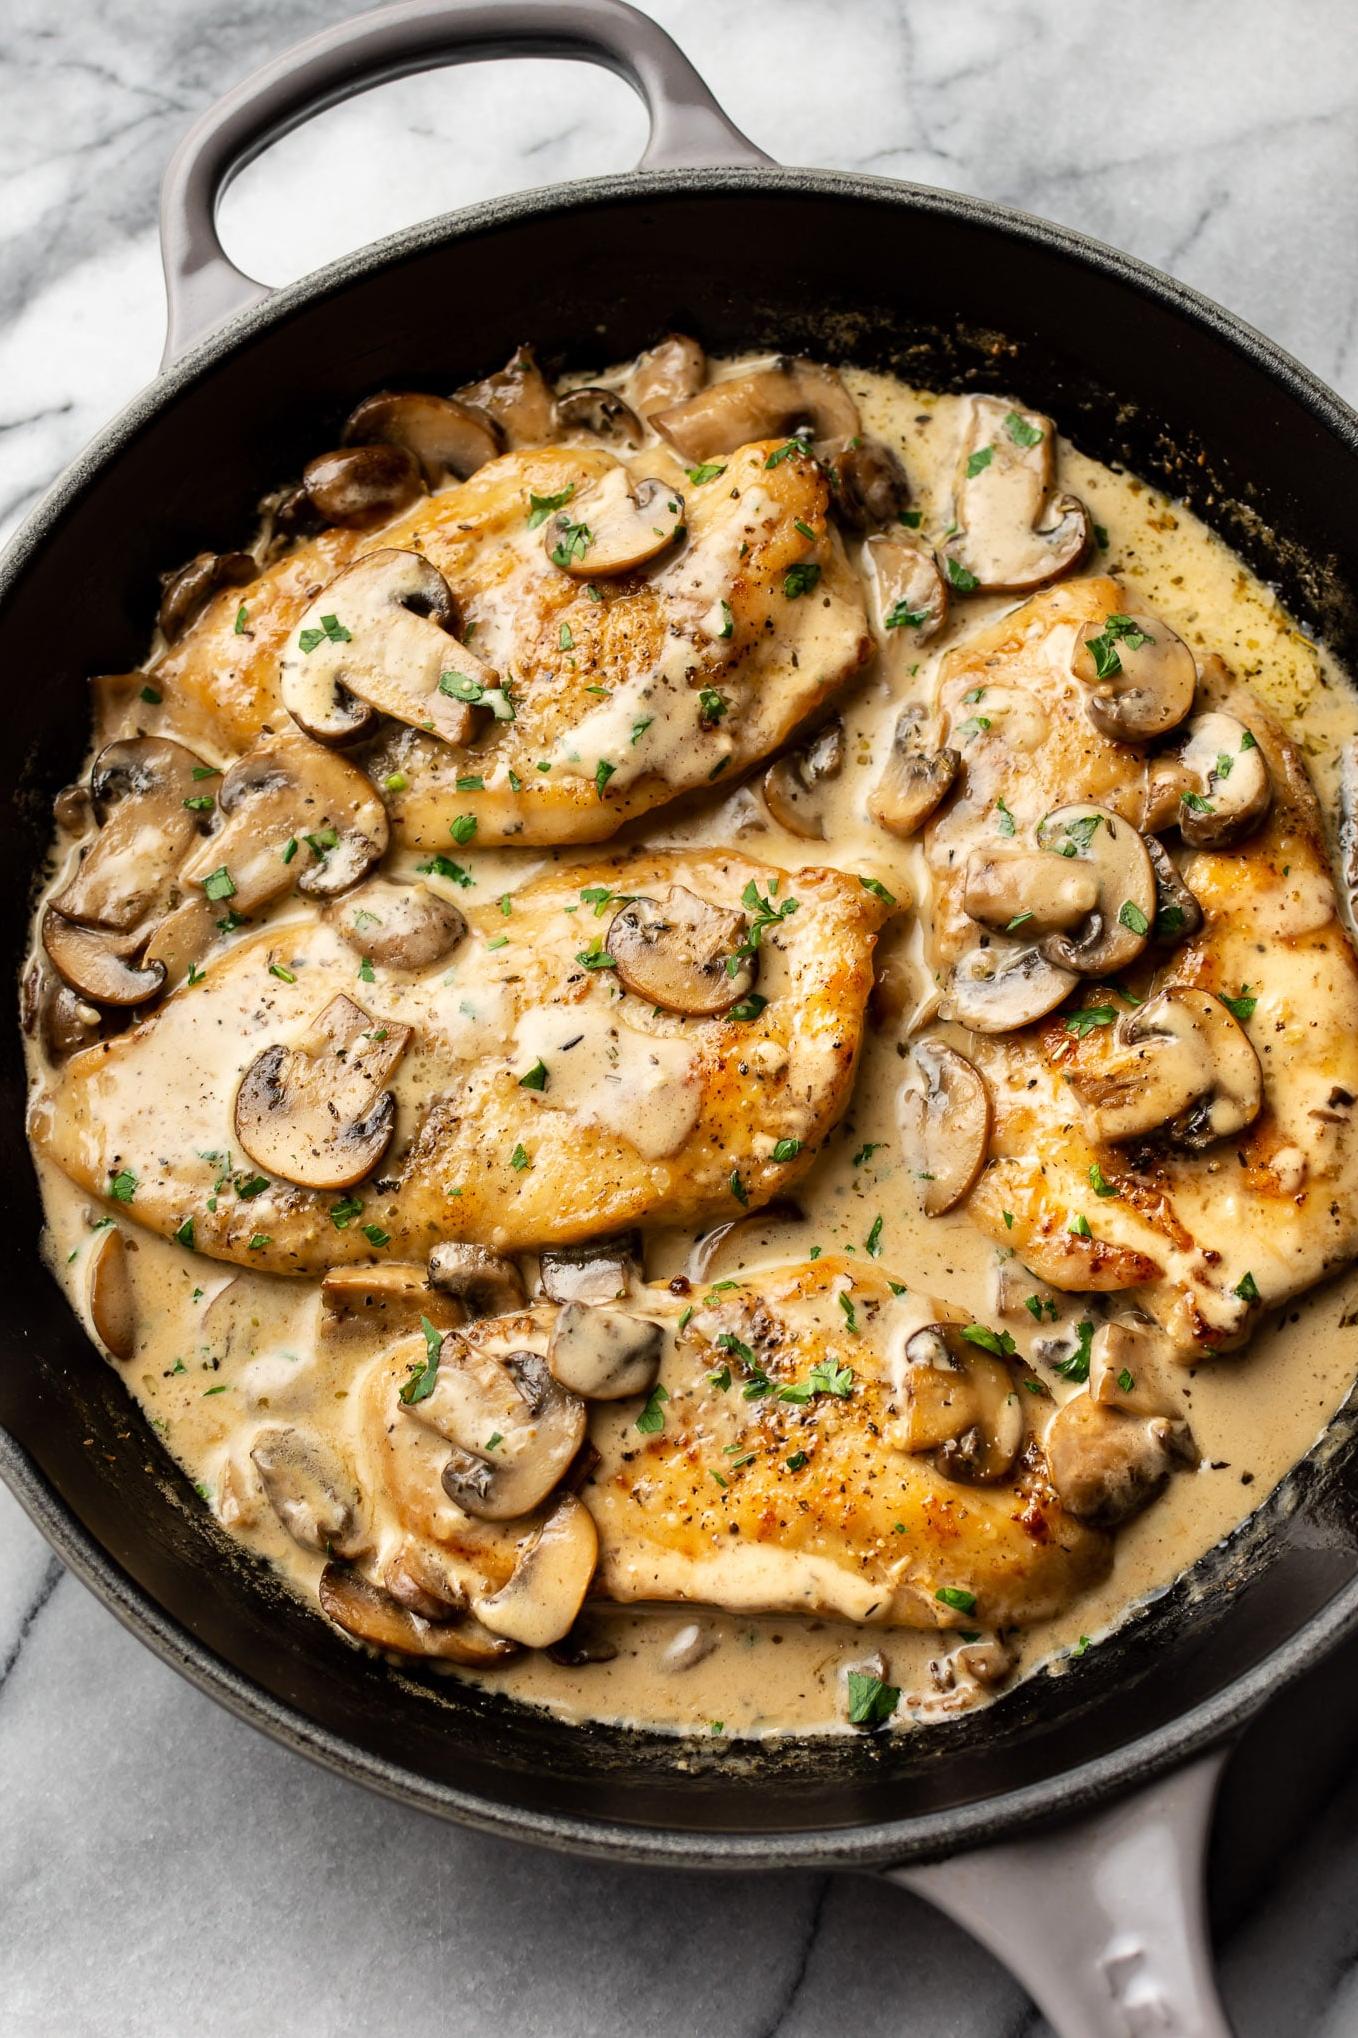 Chicken and Mushrooms in a White Wine Sauce